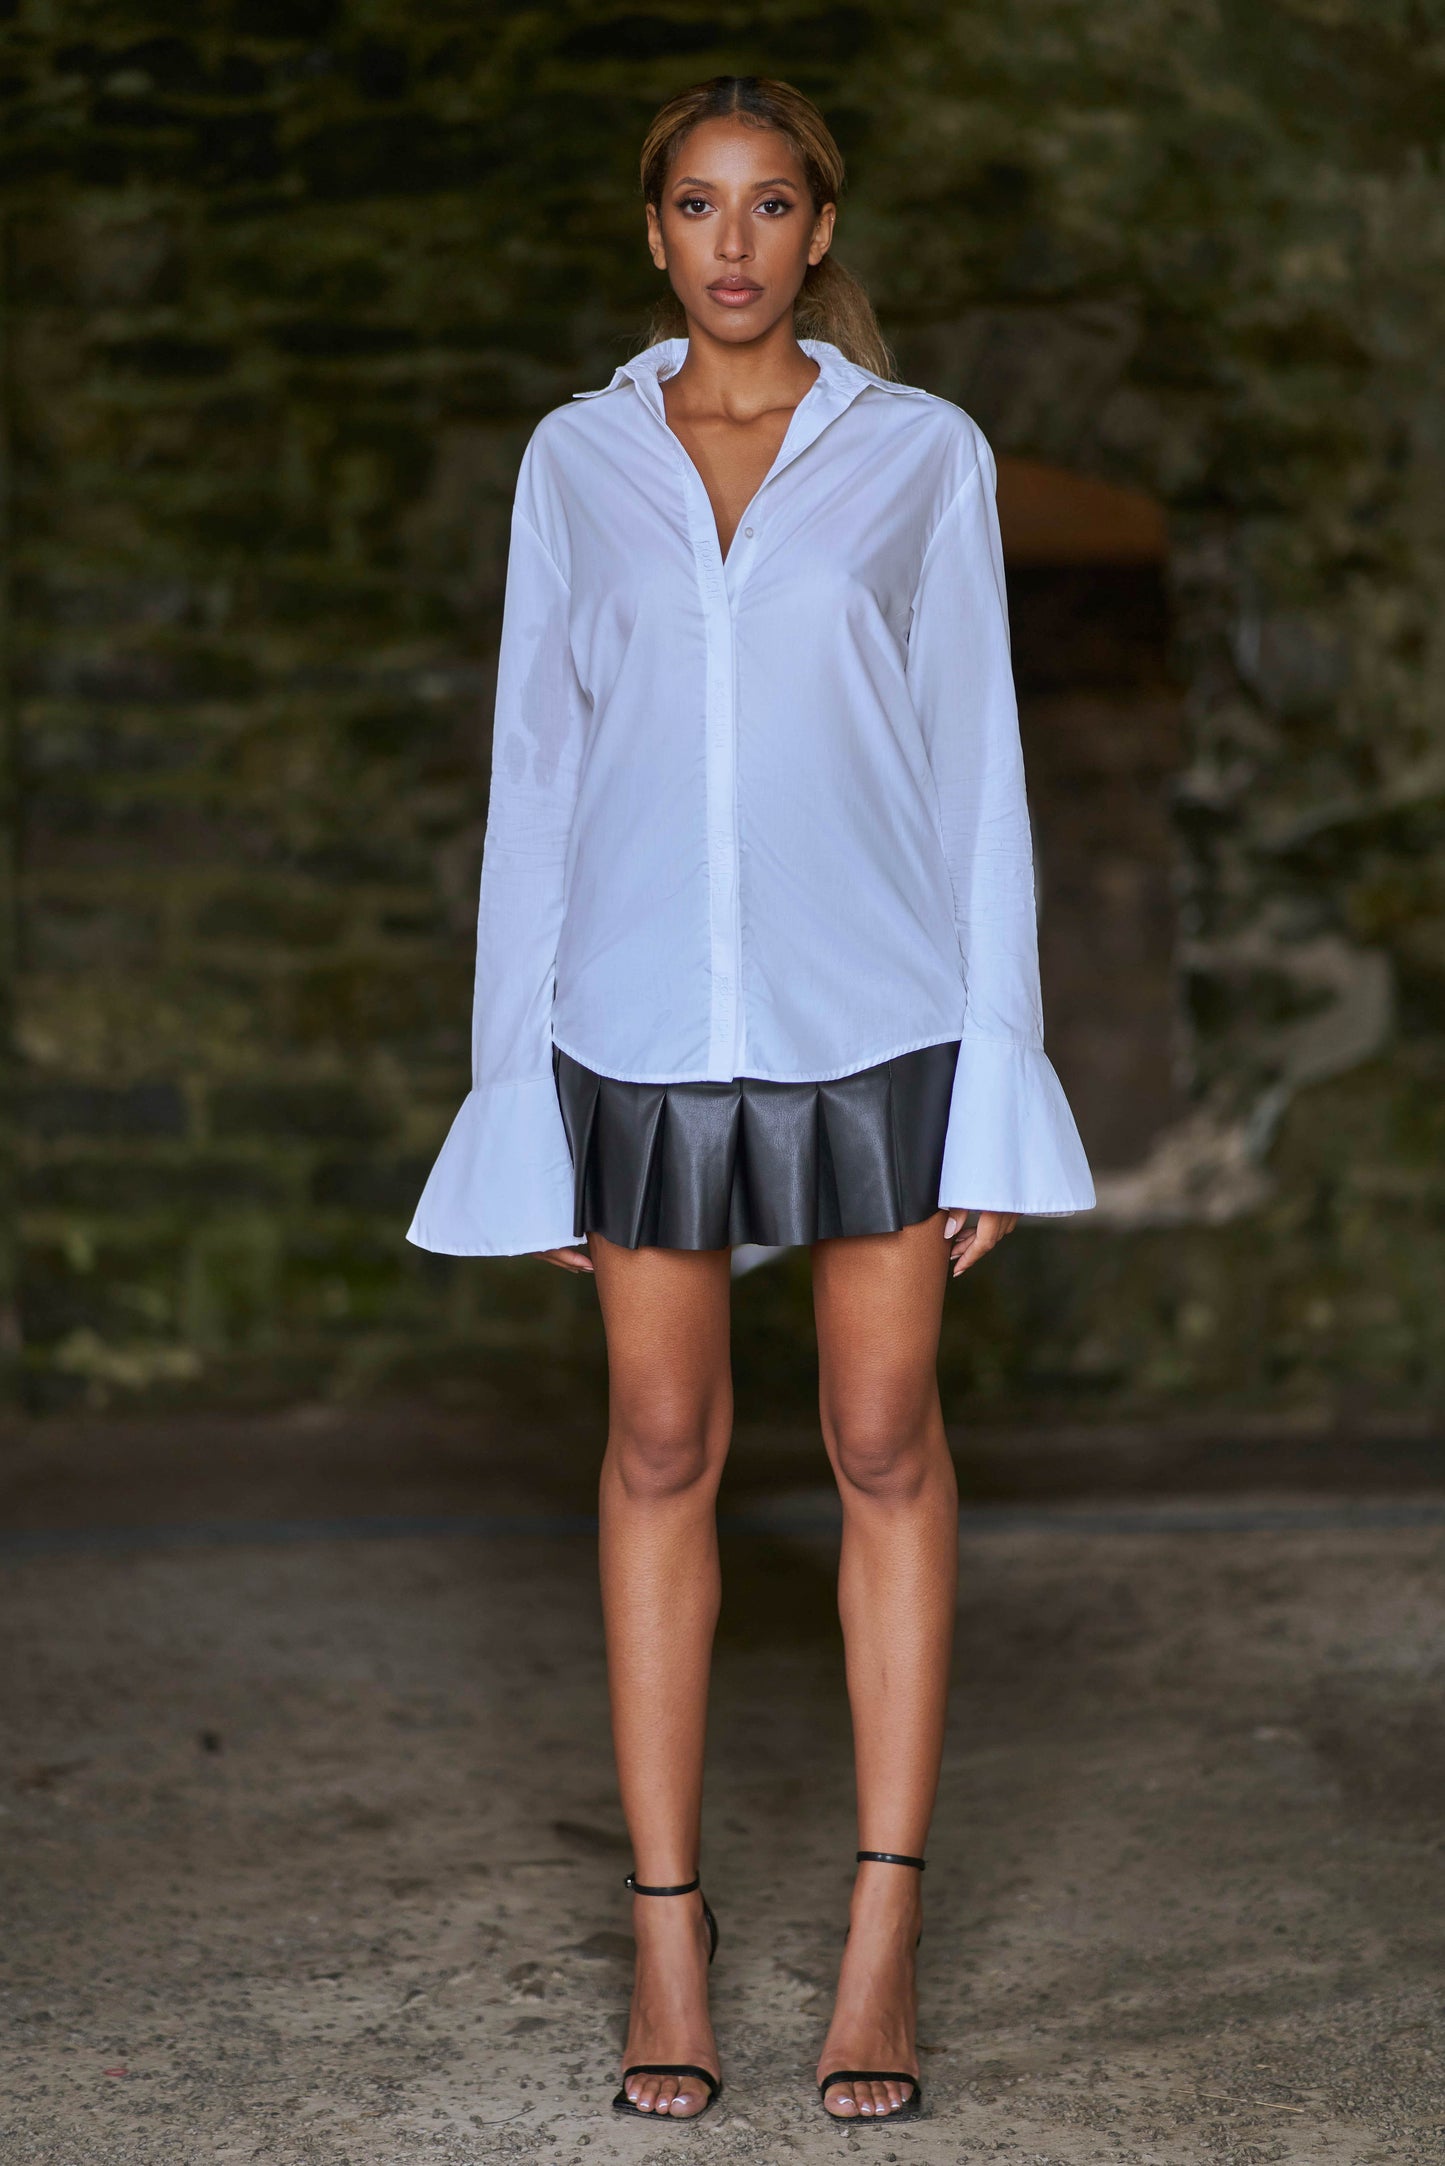 model styled in luxury white shirt with leather skirt and heels